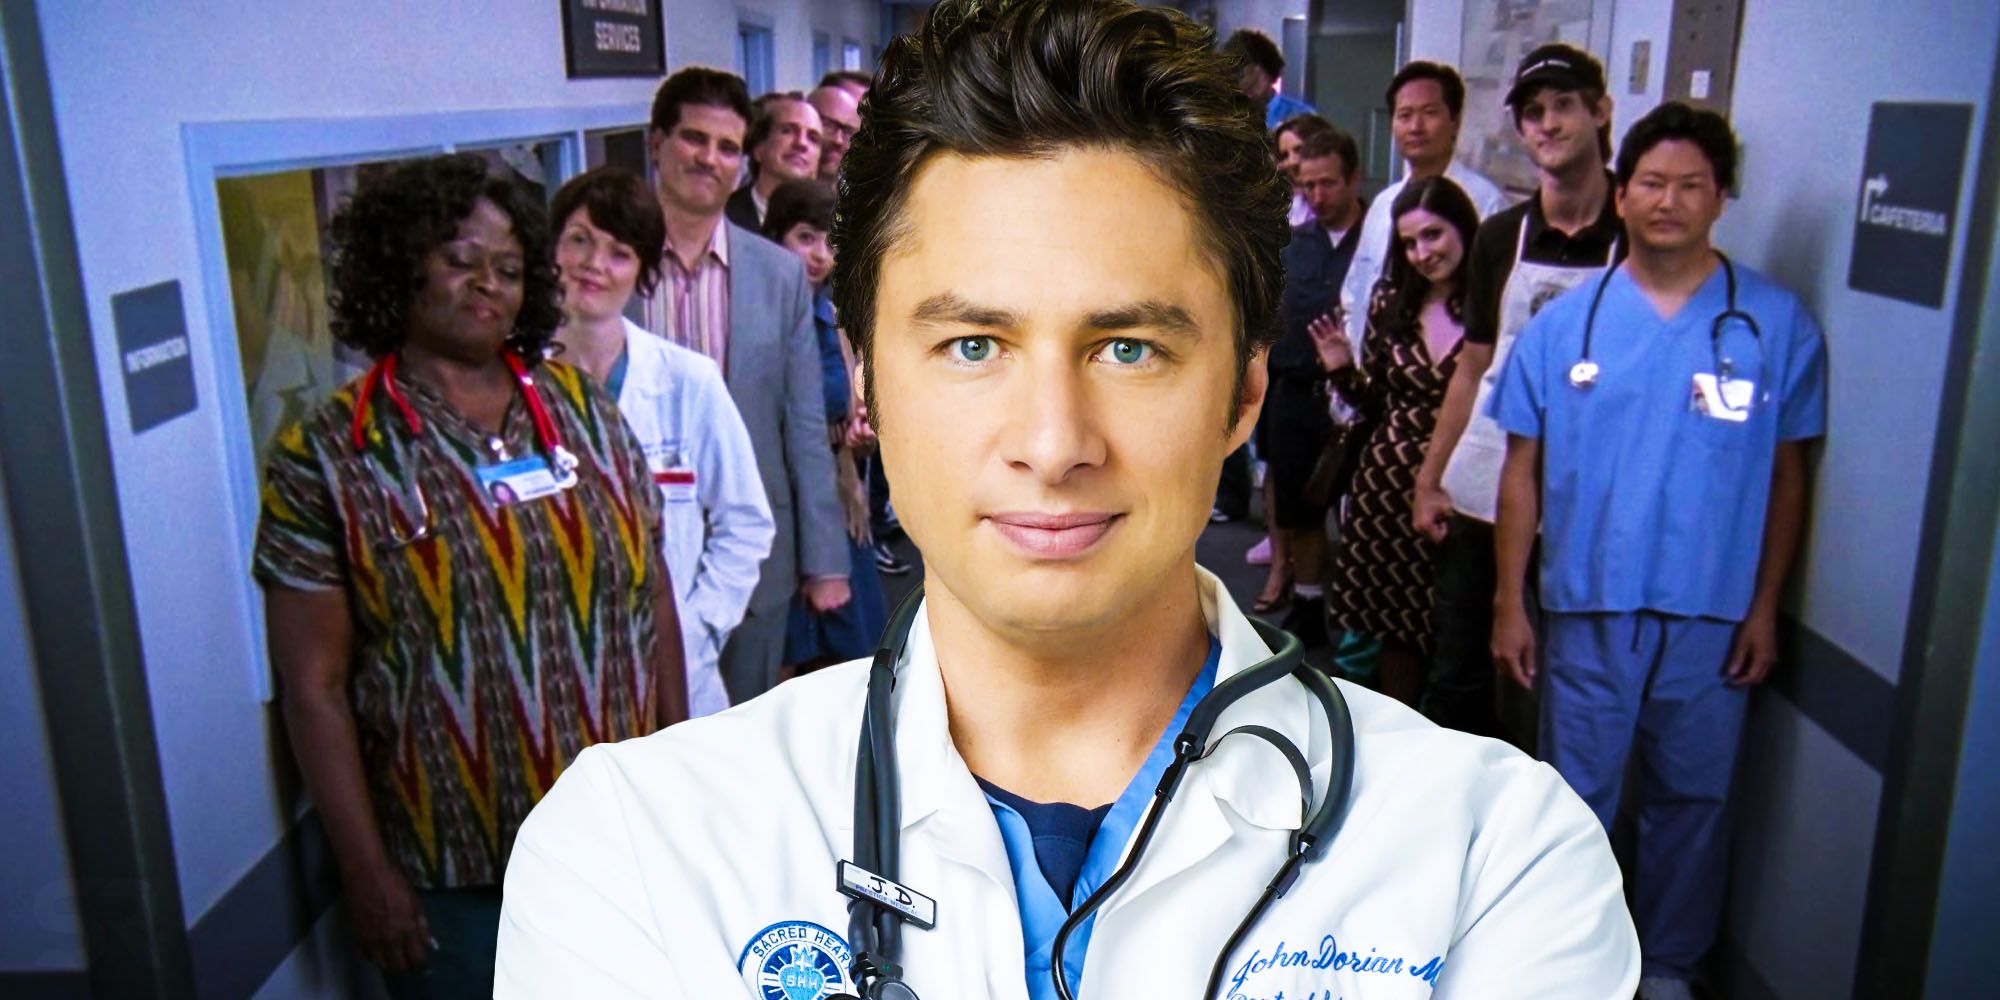 JD standing in front of the other hospital staff from Scrubs